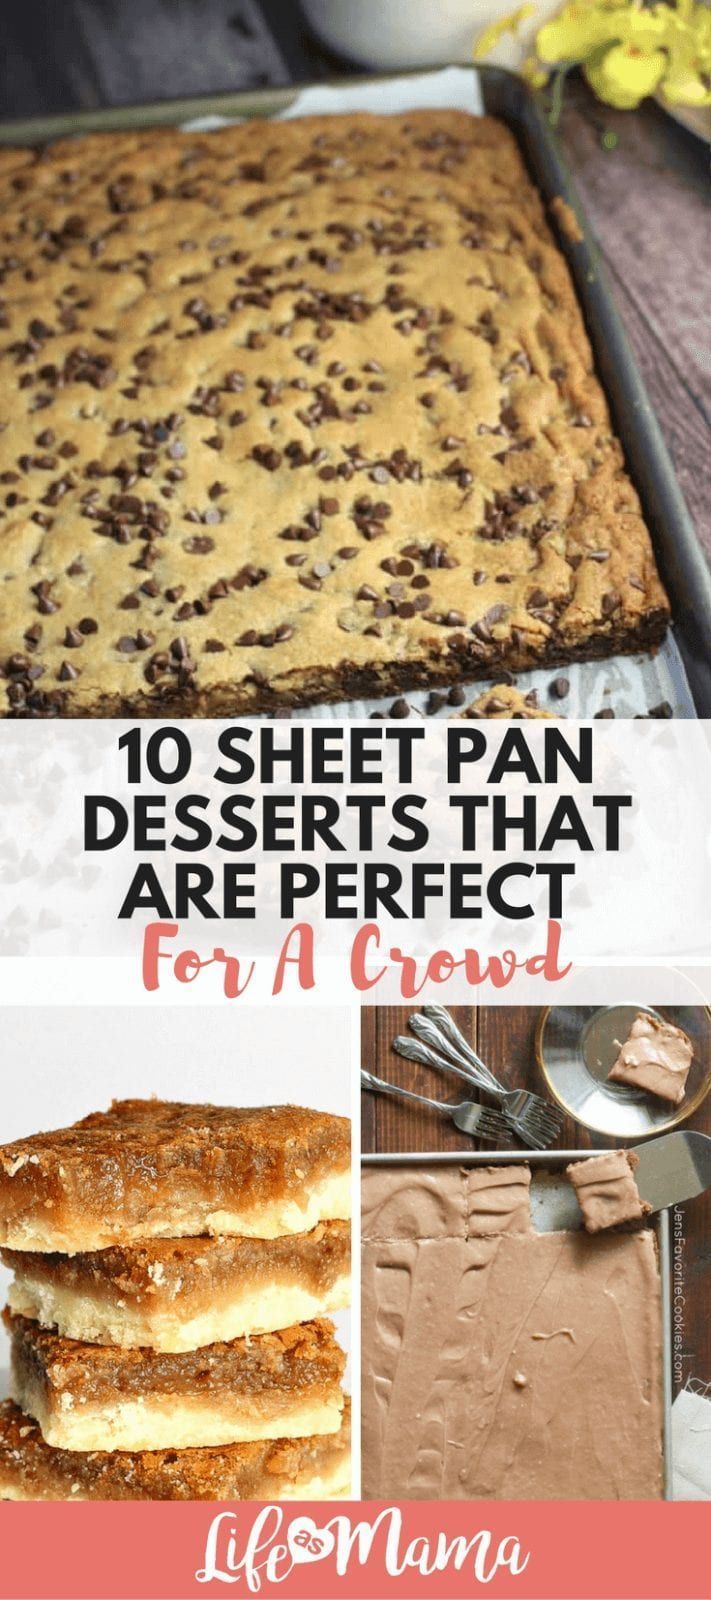 16 party desserts Healthy ideas